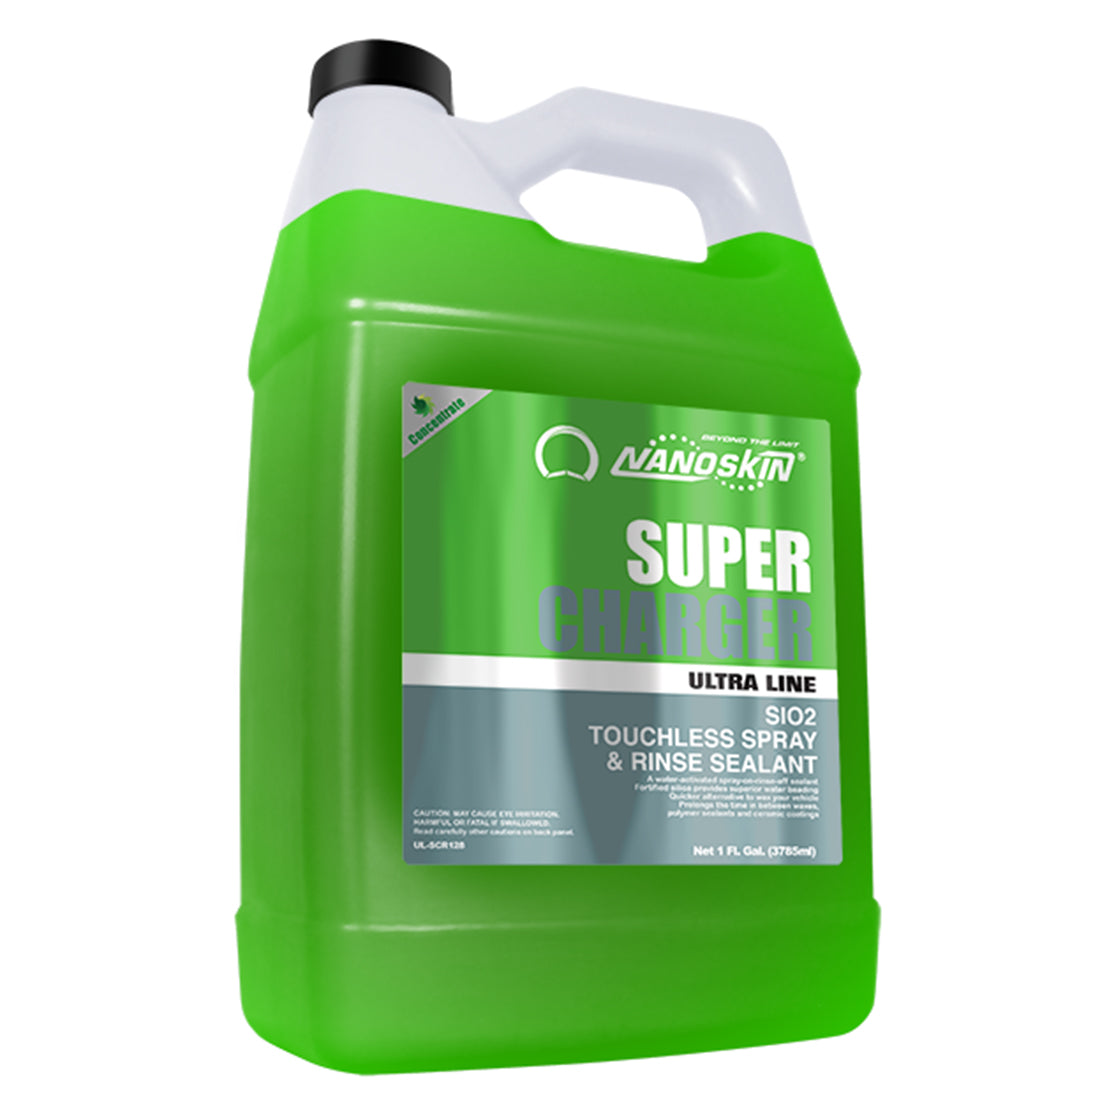 SUPER-CHARGER SiO2 Touchless Spray & Rinse Sealant RTU / 100:1